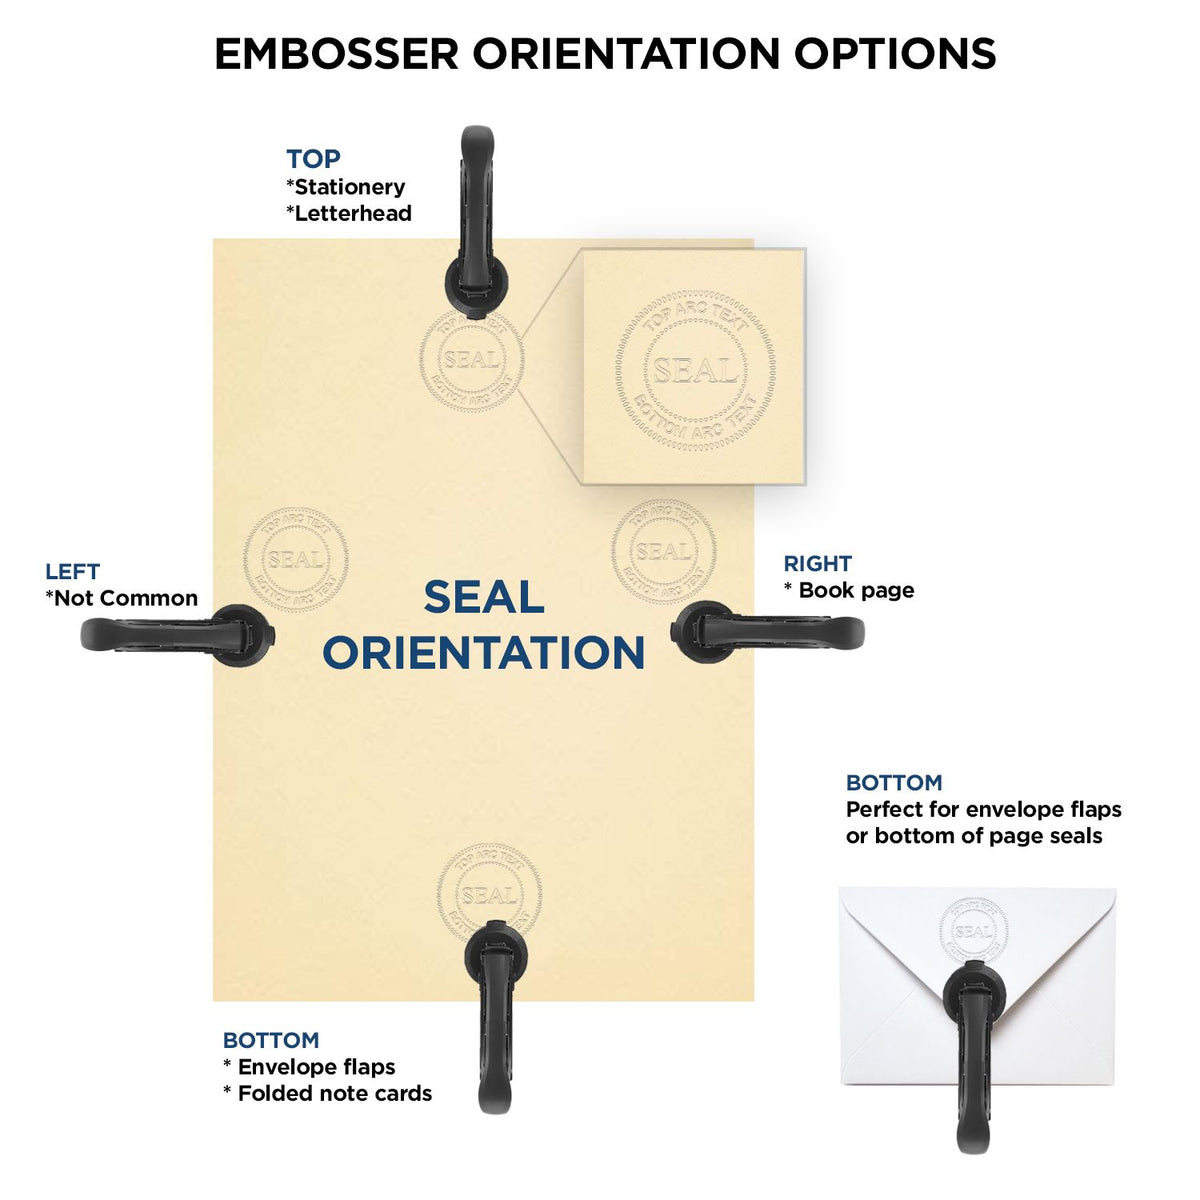 An infographic for the Hybrid New Jersey Land Surveyor Seal showing embosser orientation, this is showing examples of a top, bottom, right and left insert.